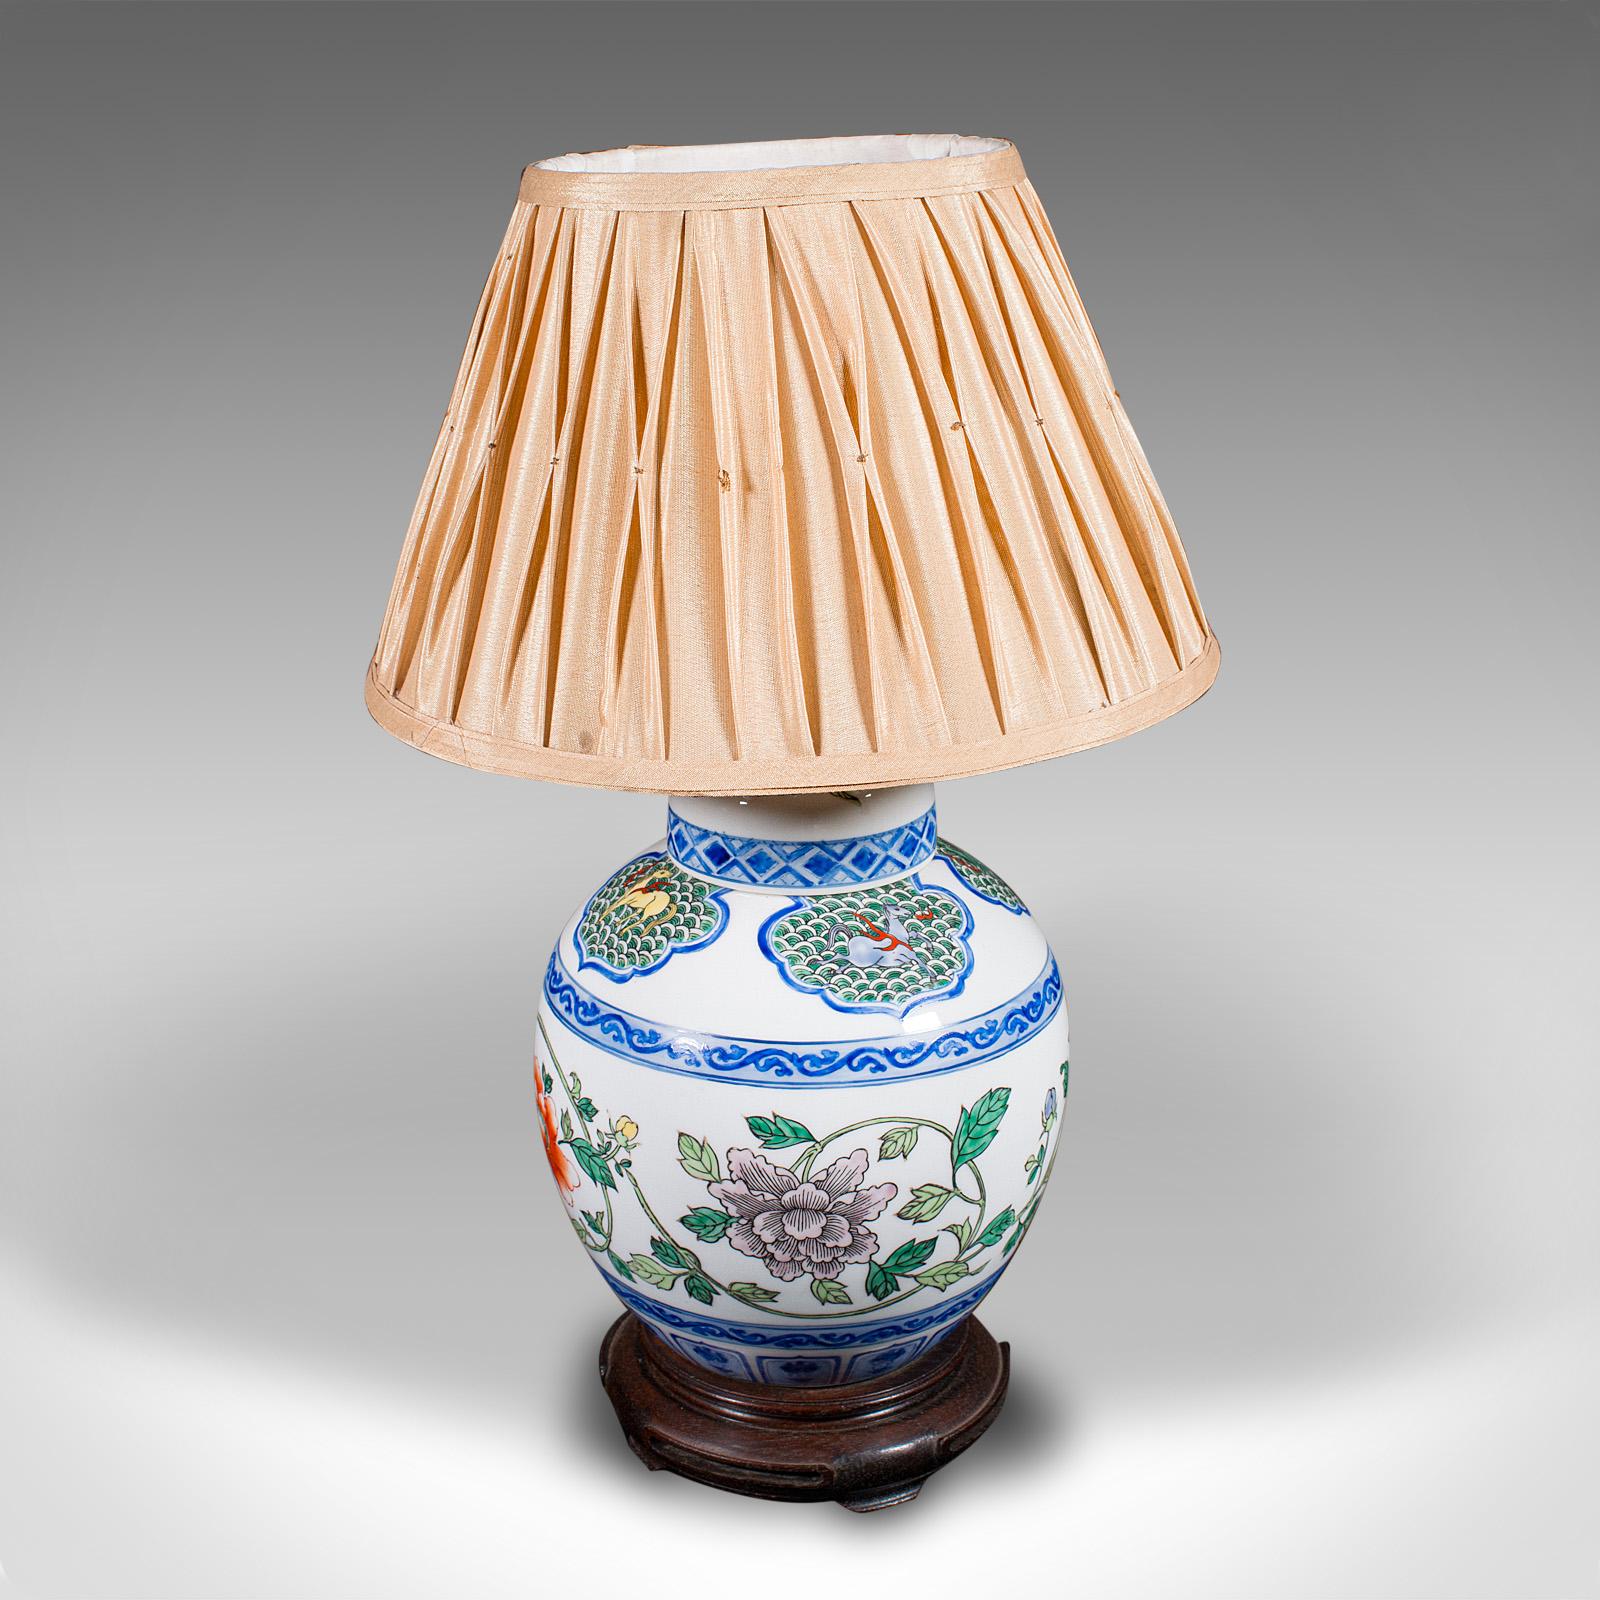 Vintage Art Deco Table Lamp, Chinese, Ceramic, Accent Light, Mid 20th Century In Good Condition For Sale In Hele, Devon, GB